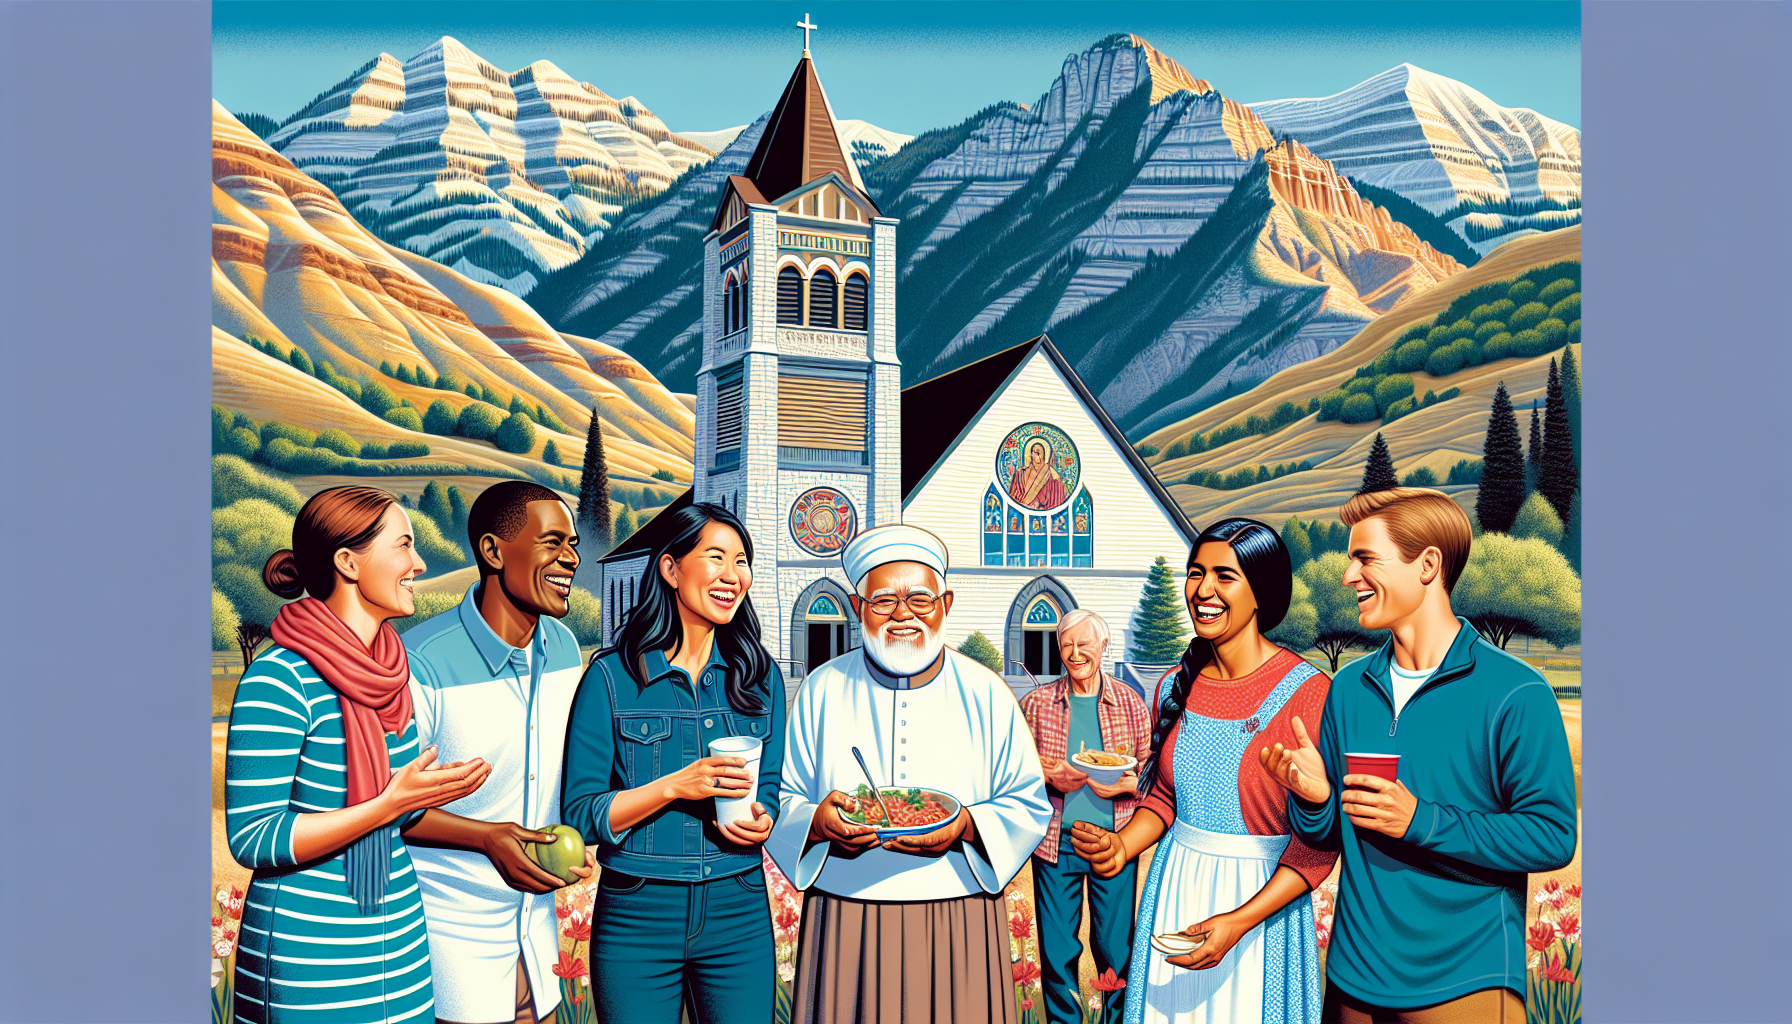 Create an image of a diverse group of people standing in front of a picturesque church in Utah, with the backdrop of stunning mountain landscapes. They should be engaged in warm, communal activities,